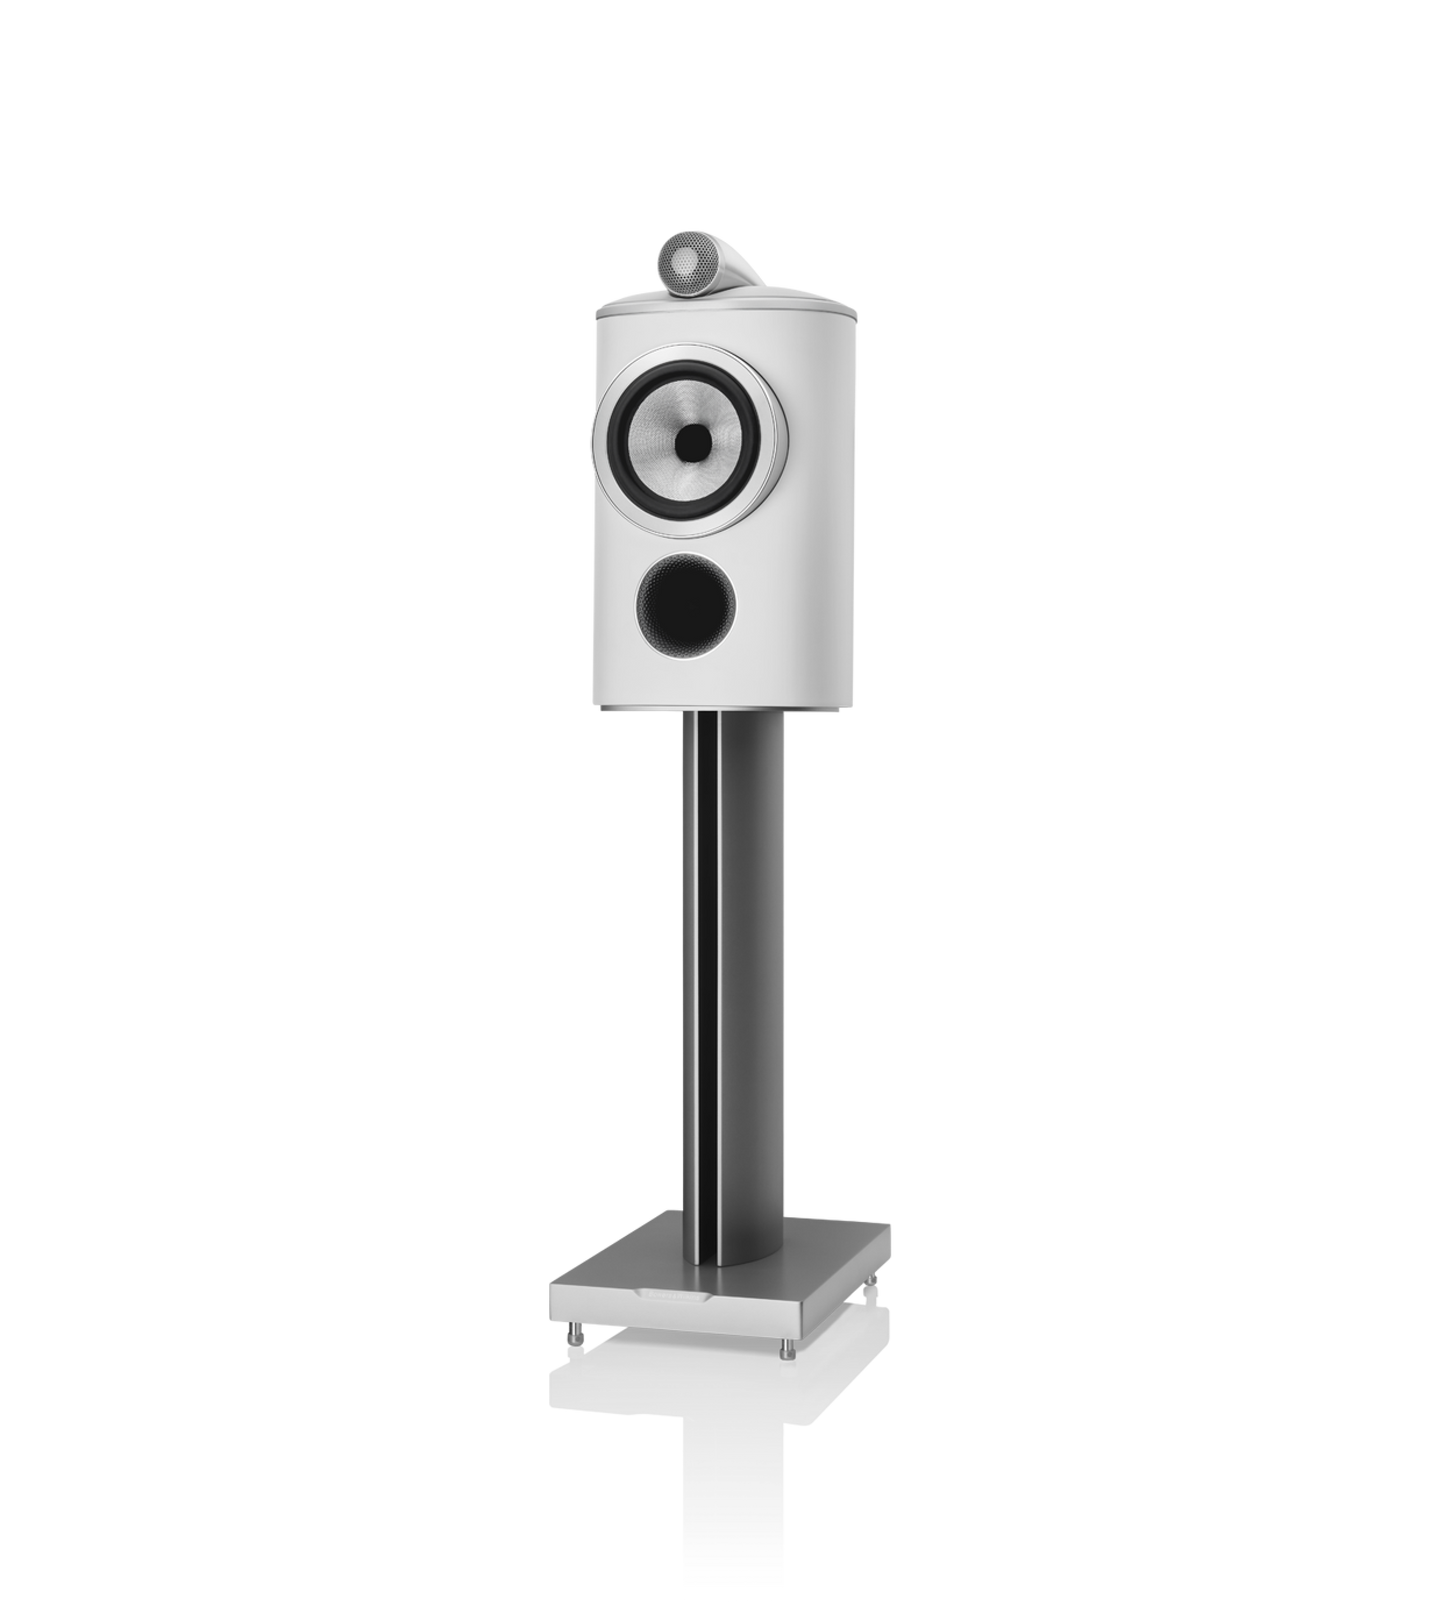 The 805 D4 stand-mount loudspeaker is the most compact model in the 800 Series Diamond™ range, but it’s still packed with advanced technologies, including the Diamond dome tweeter and the Solid Body Tweeter-on-Top. Little Diamond 805 D4 might be smaller than its tower speaker siblings, but it’s no lightweight.